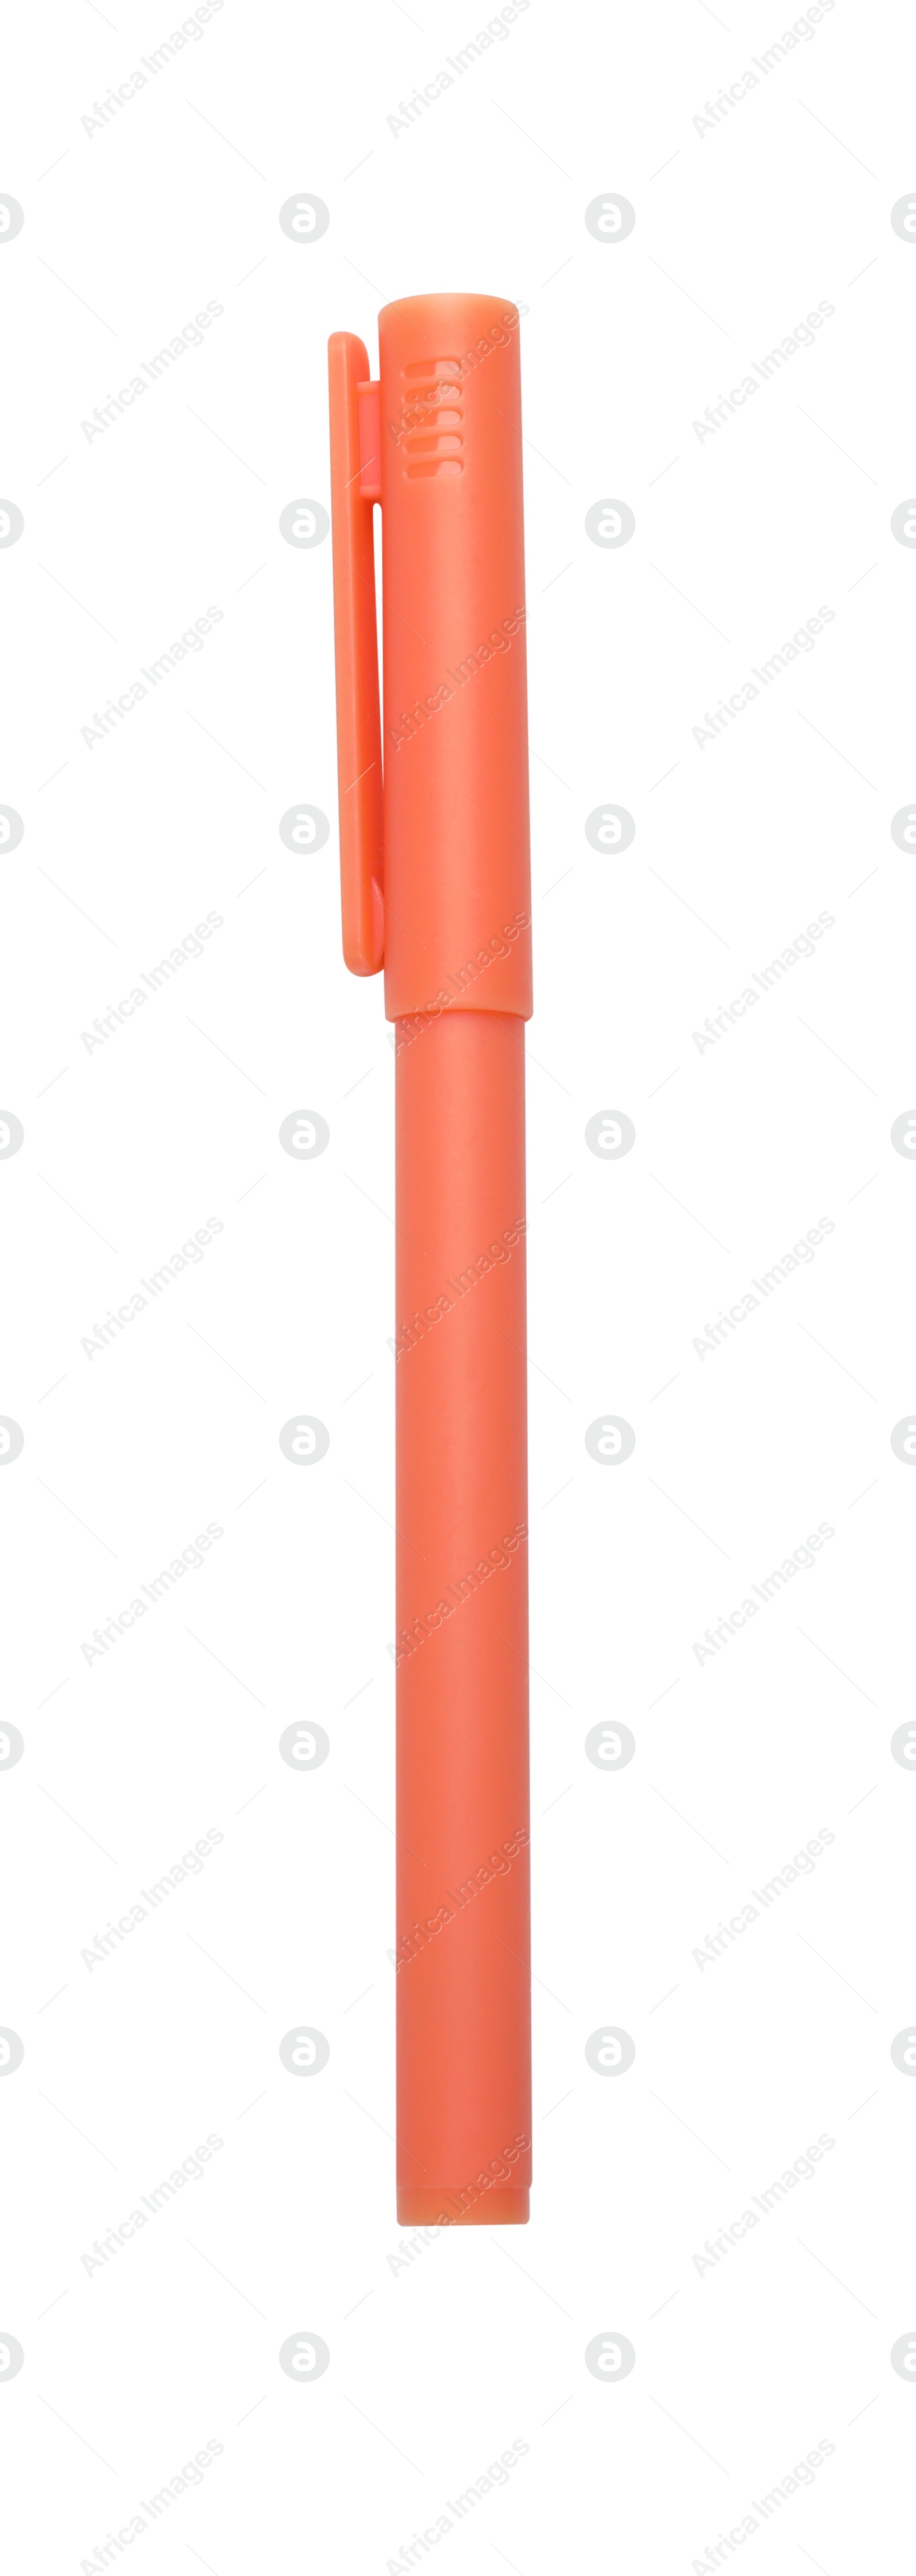 Photo of One orange marker on white background, top view